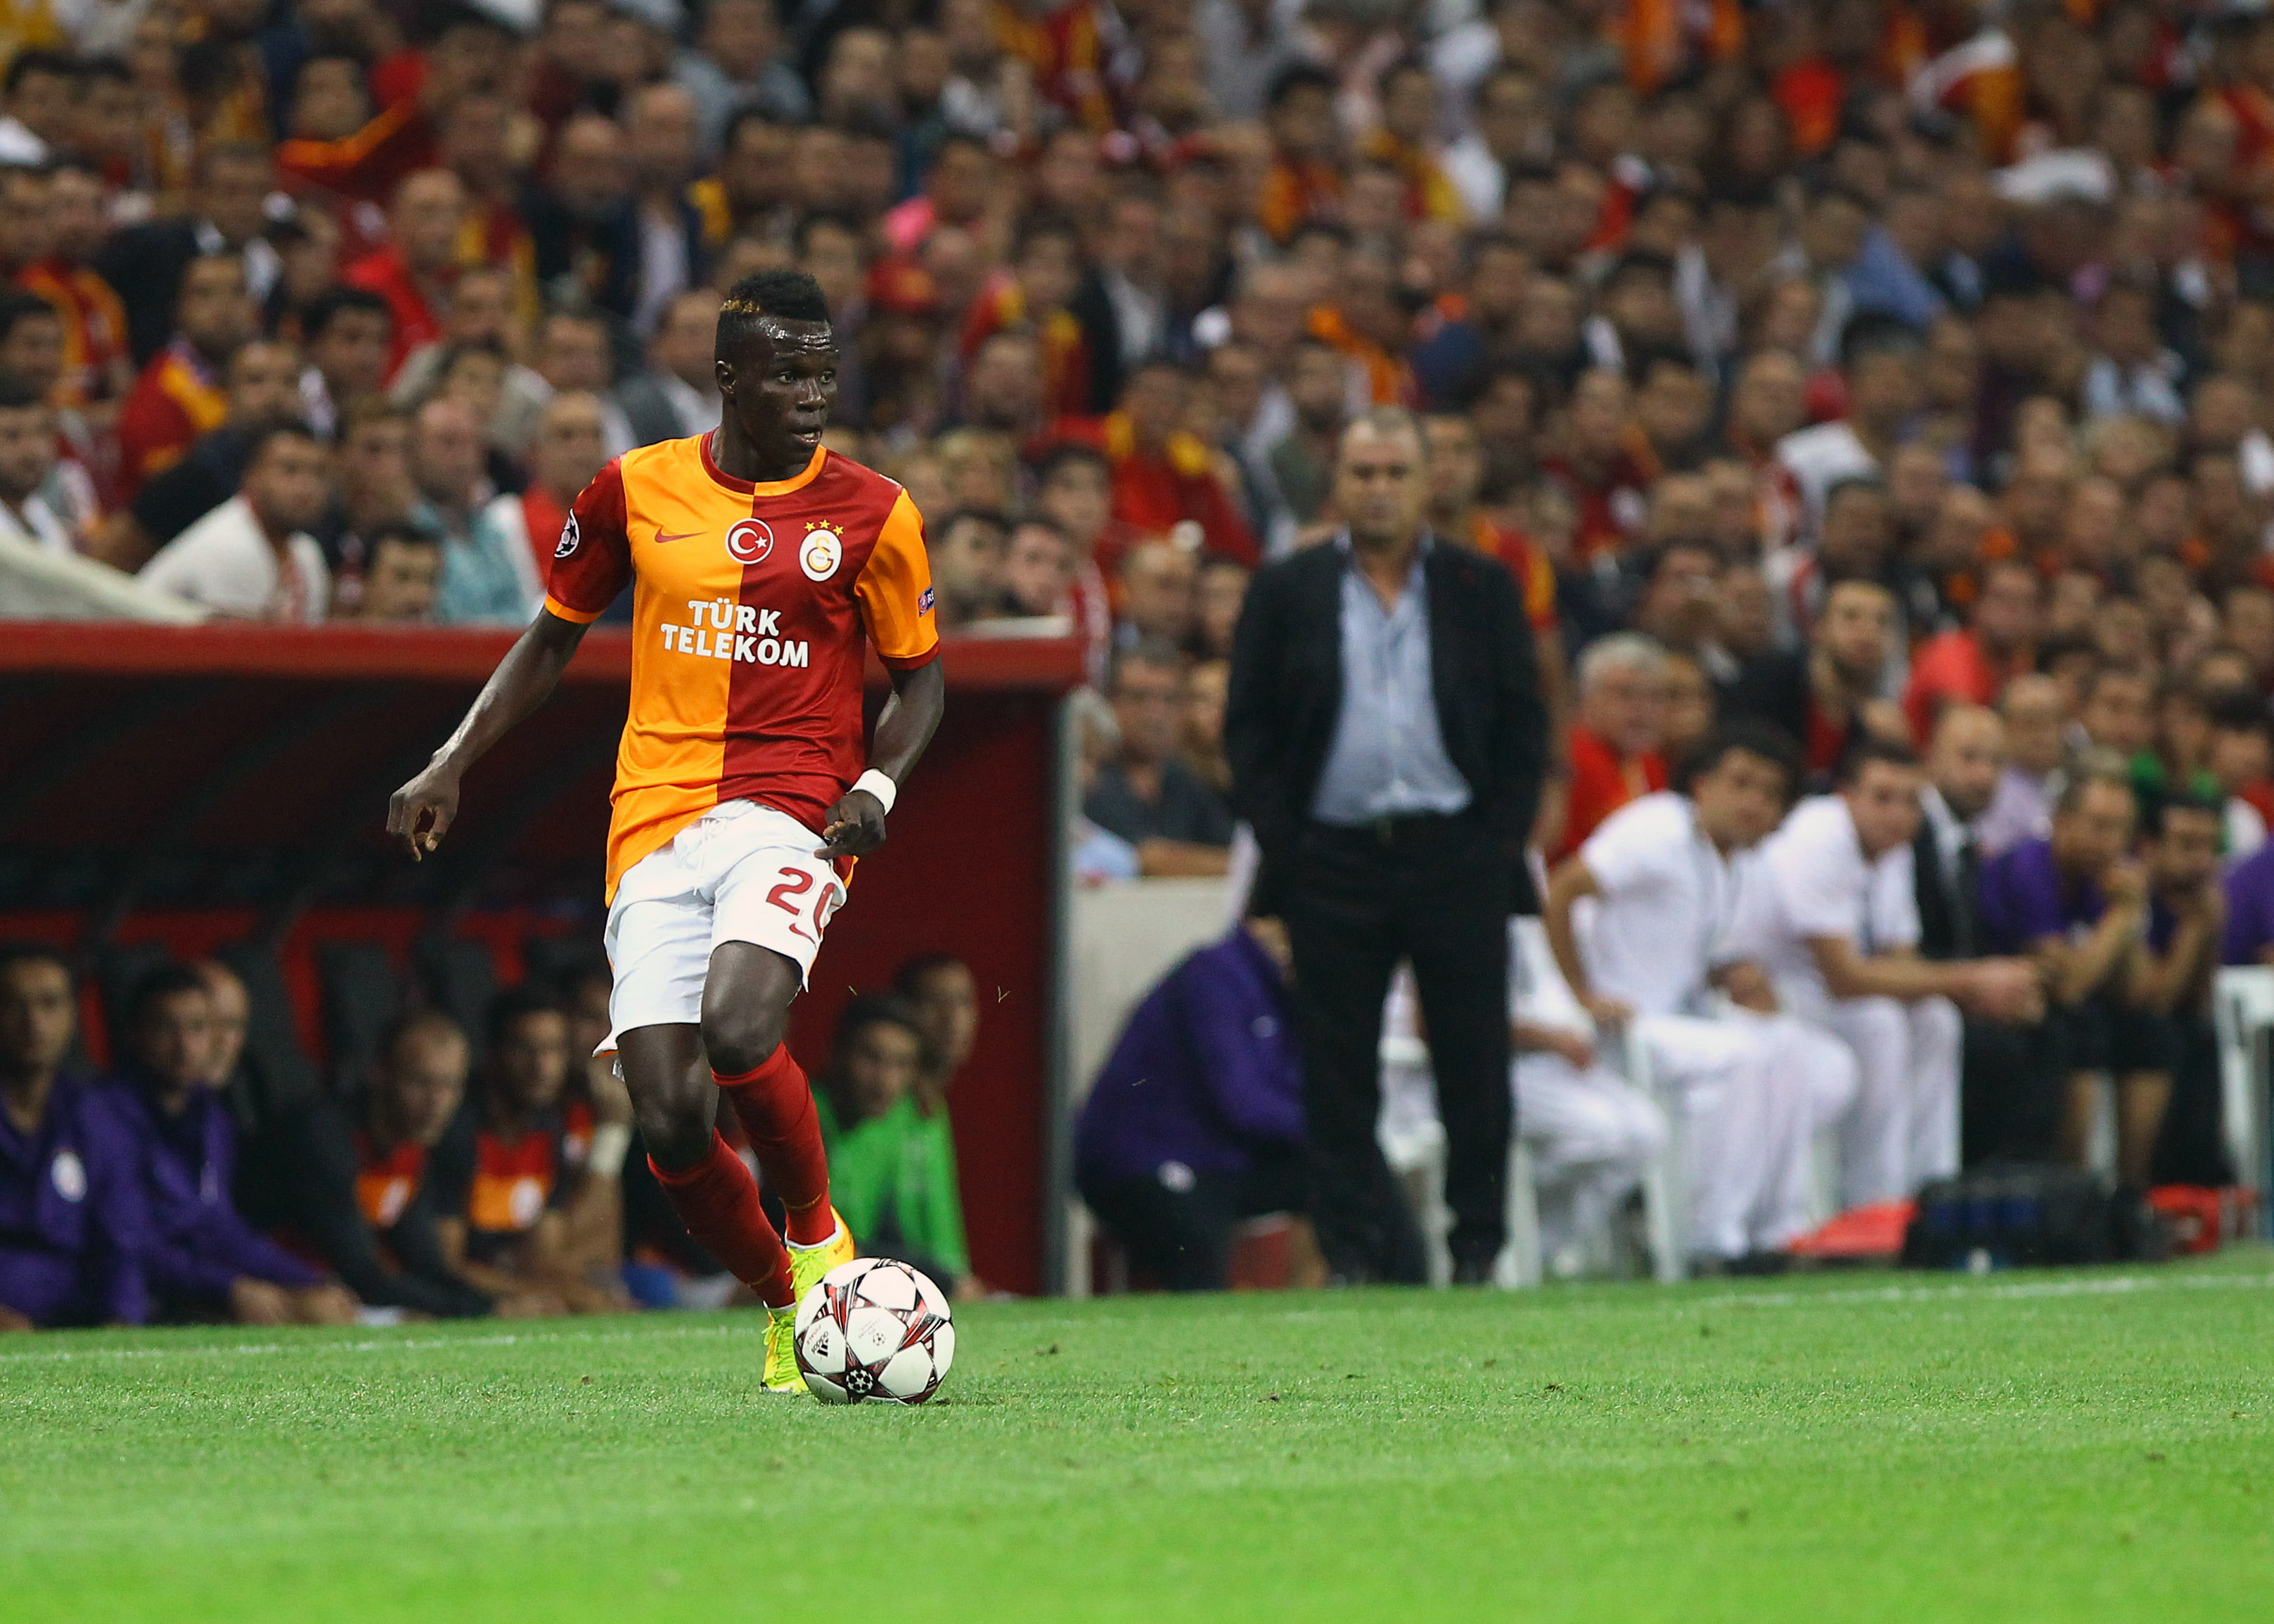 ISTANBUL, TURKEY - SEPTEMBER 17:  Bruma of Galatasaray AS in action during the UEFA Champions League group stage match between Real Madrid CF and Galatasaray AS held on September 17, 2013 at the Ali Sami Yen Spor Kompleksi, in Istanbul, Turkey. (Photo by EuroFootball/Getty Images)